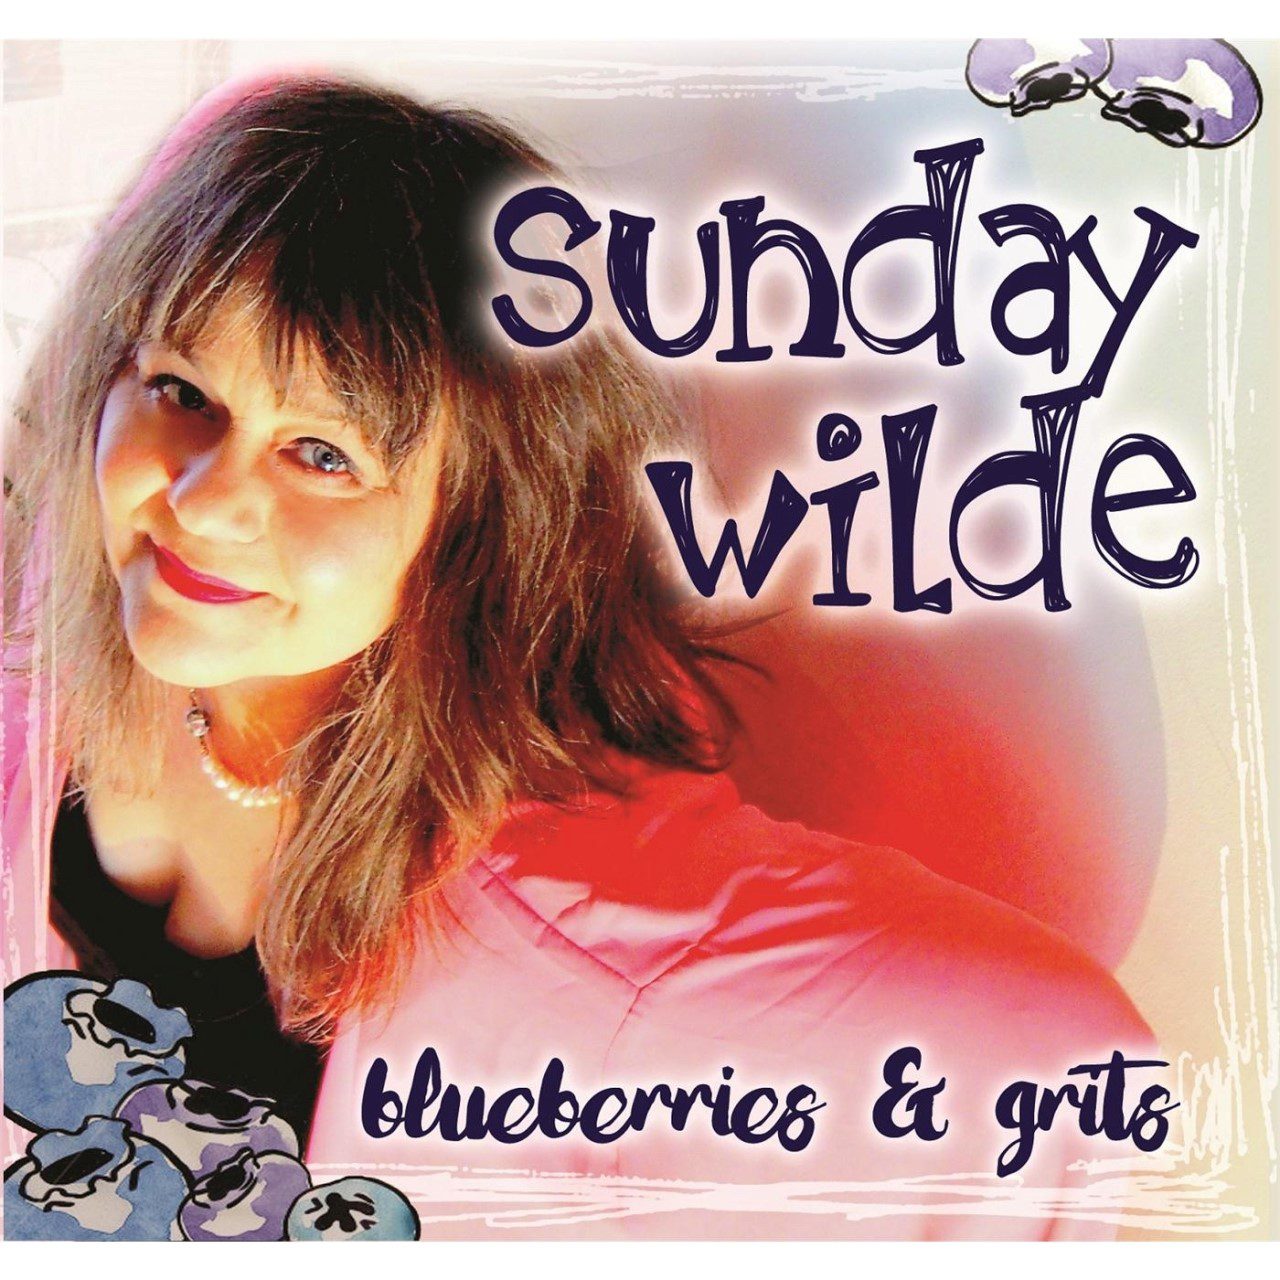 Sunday Wilde - Blueberries And Grits cover album